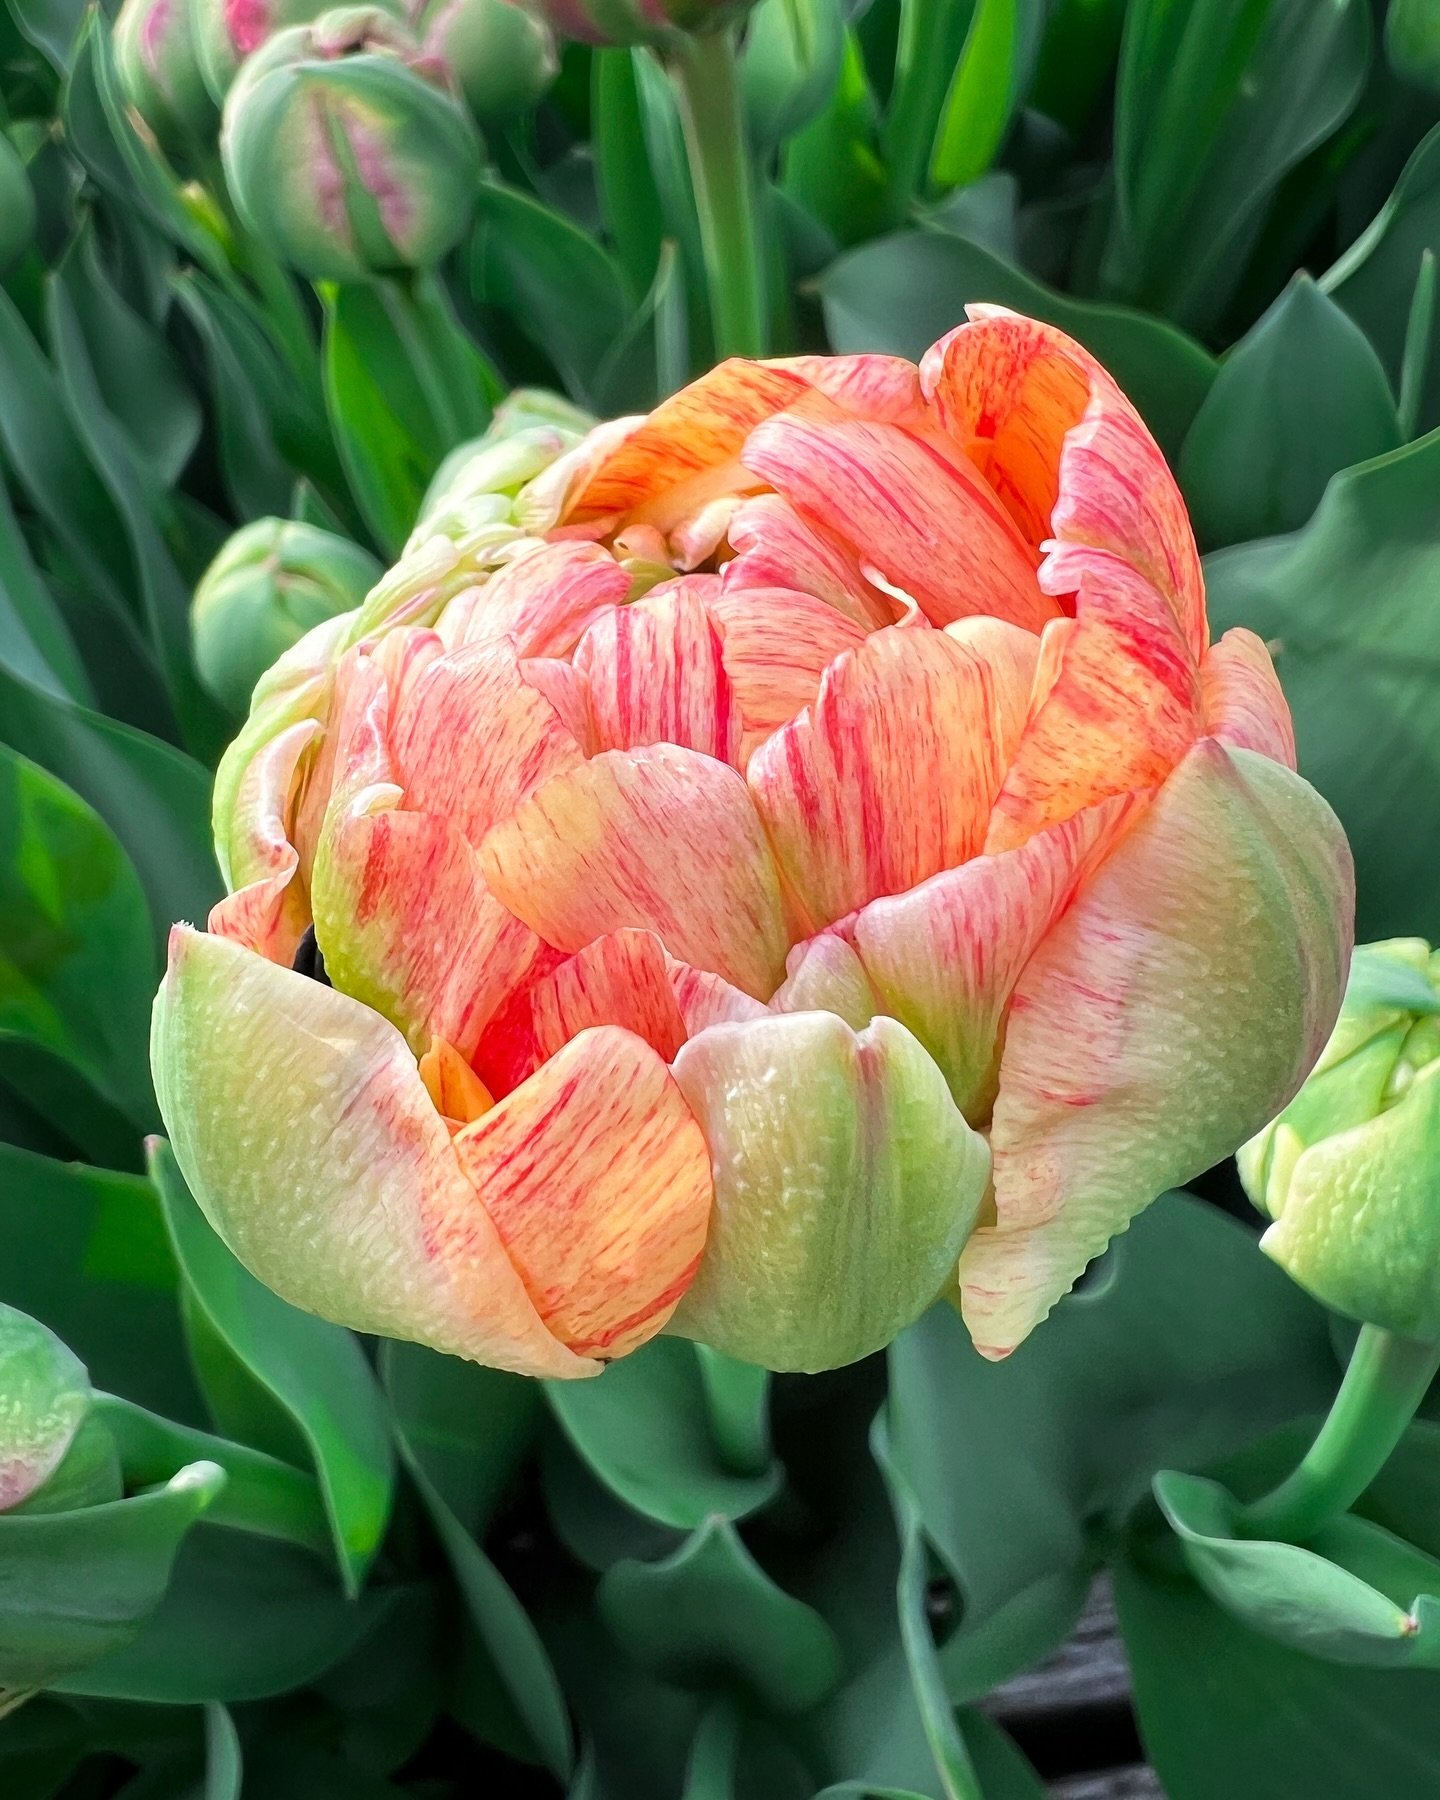 Gudoshnik Double tulip, the biggest tulip we have. It has two foot stems and huge bomb flower, in the colors of Ranier cherries.
.
.
.
#tulips #springflowers #mayfieldfarm #mayfieldfarmwv #morgantownflowerfarm #flowerfarm #flowerfarmer #womenwhofarm 